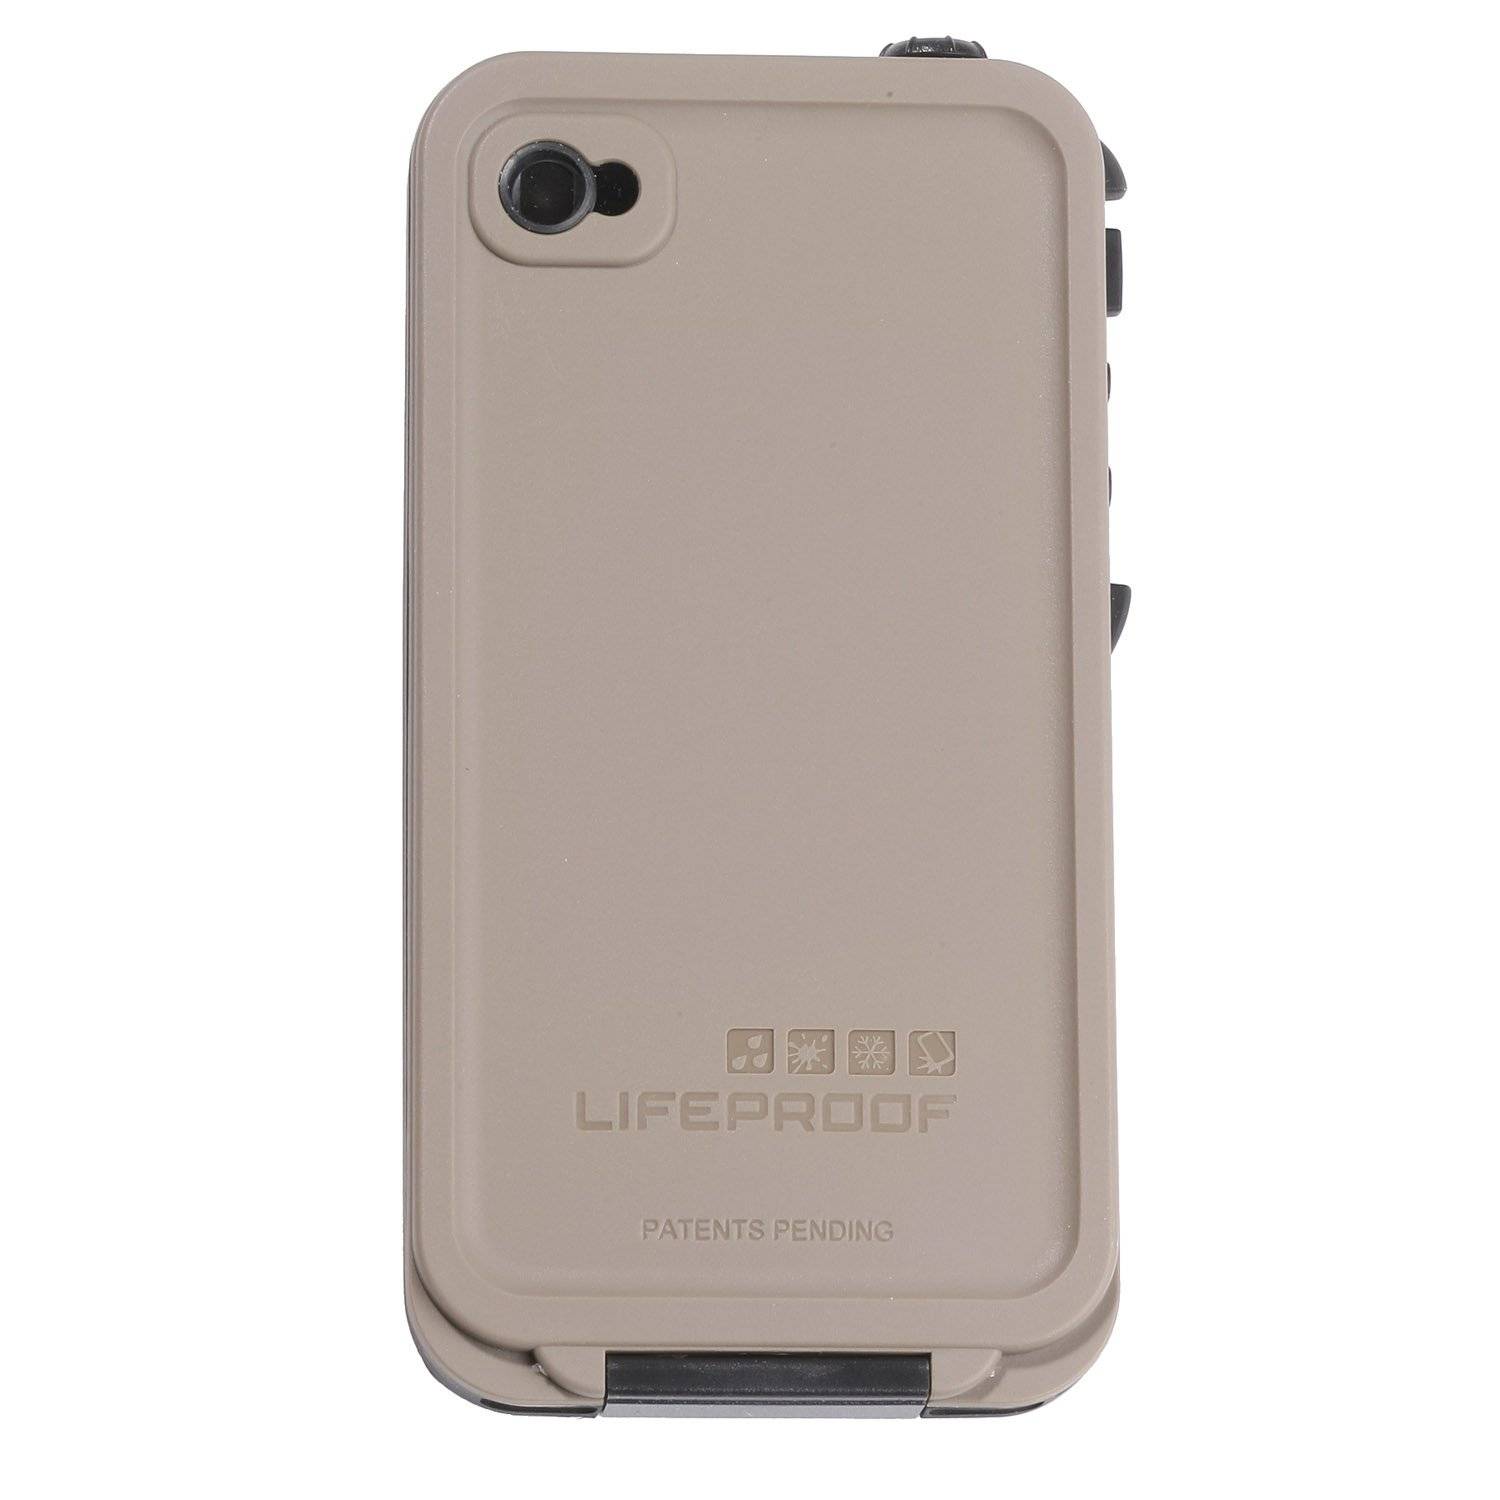 LifeProof iPhone 4 and 4S Case